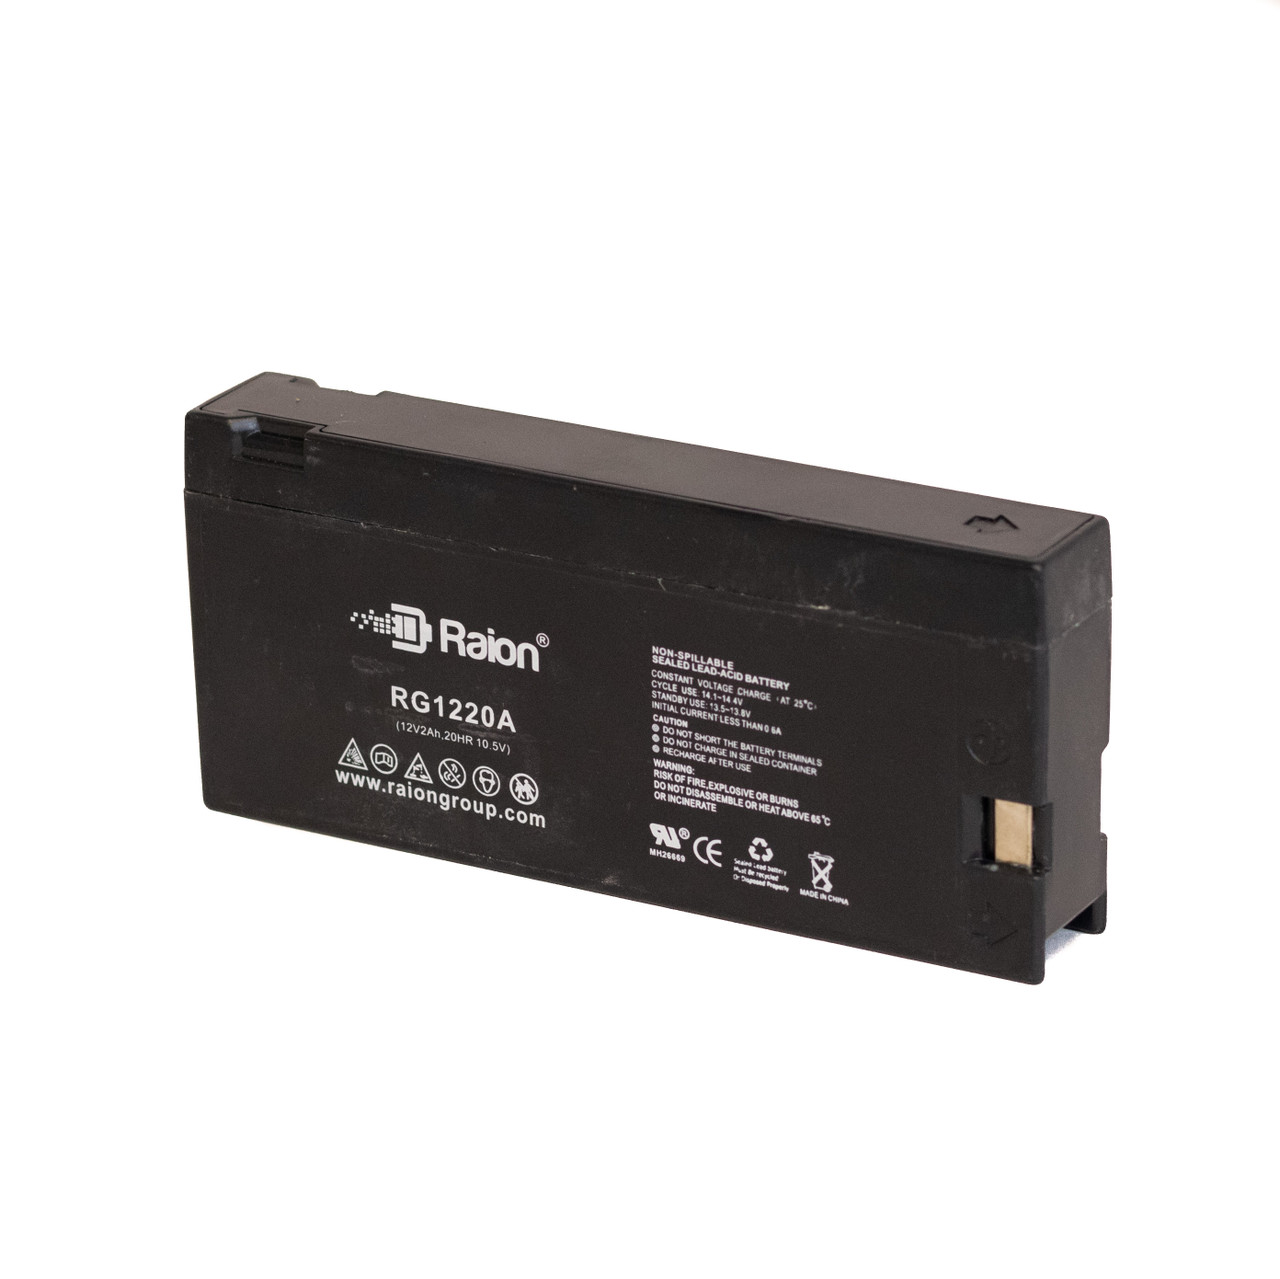 Raion Power RG1220A Replacement Battery for JC Penney 890-1886